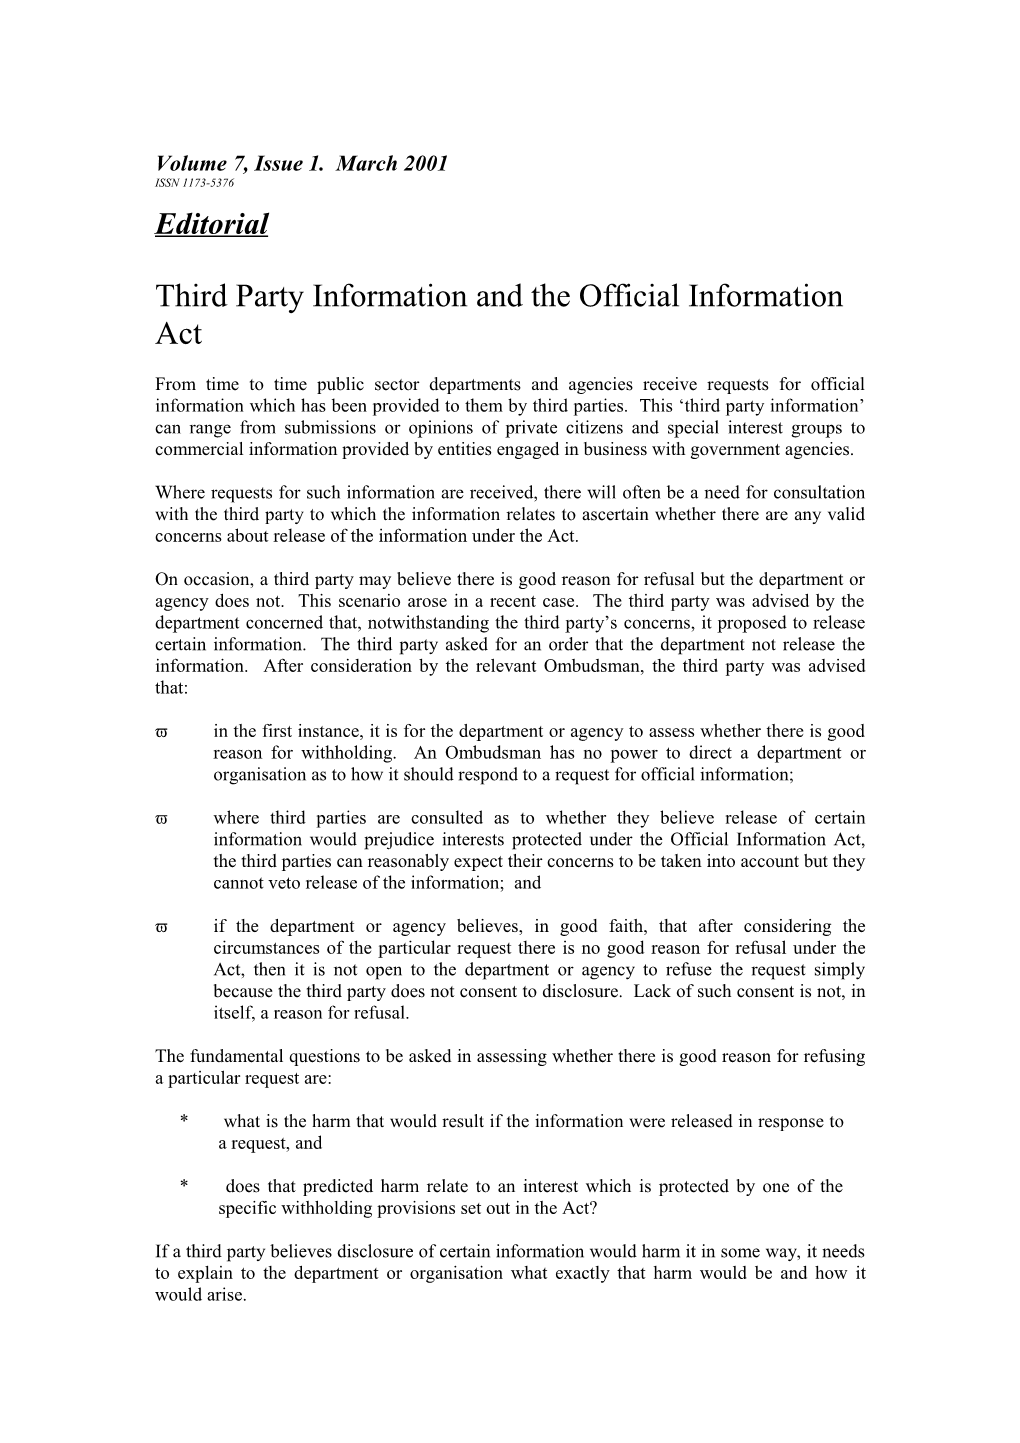 Third Party Information and the Official Information Act